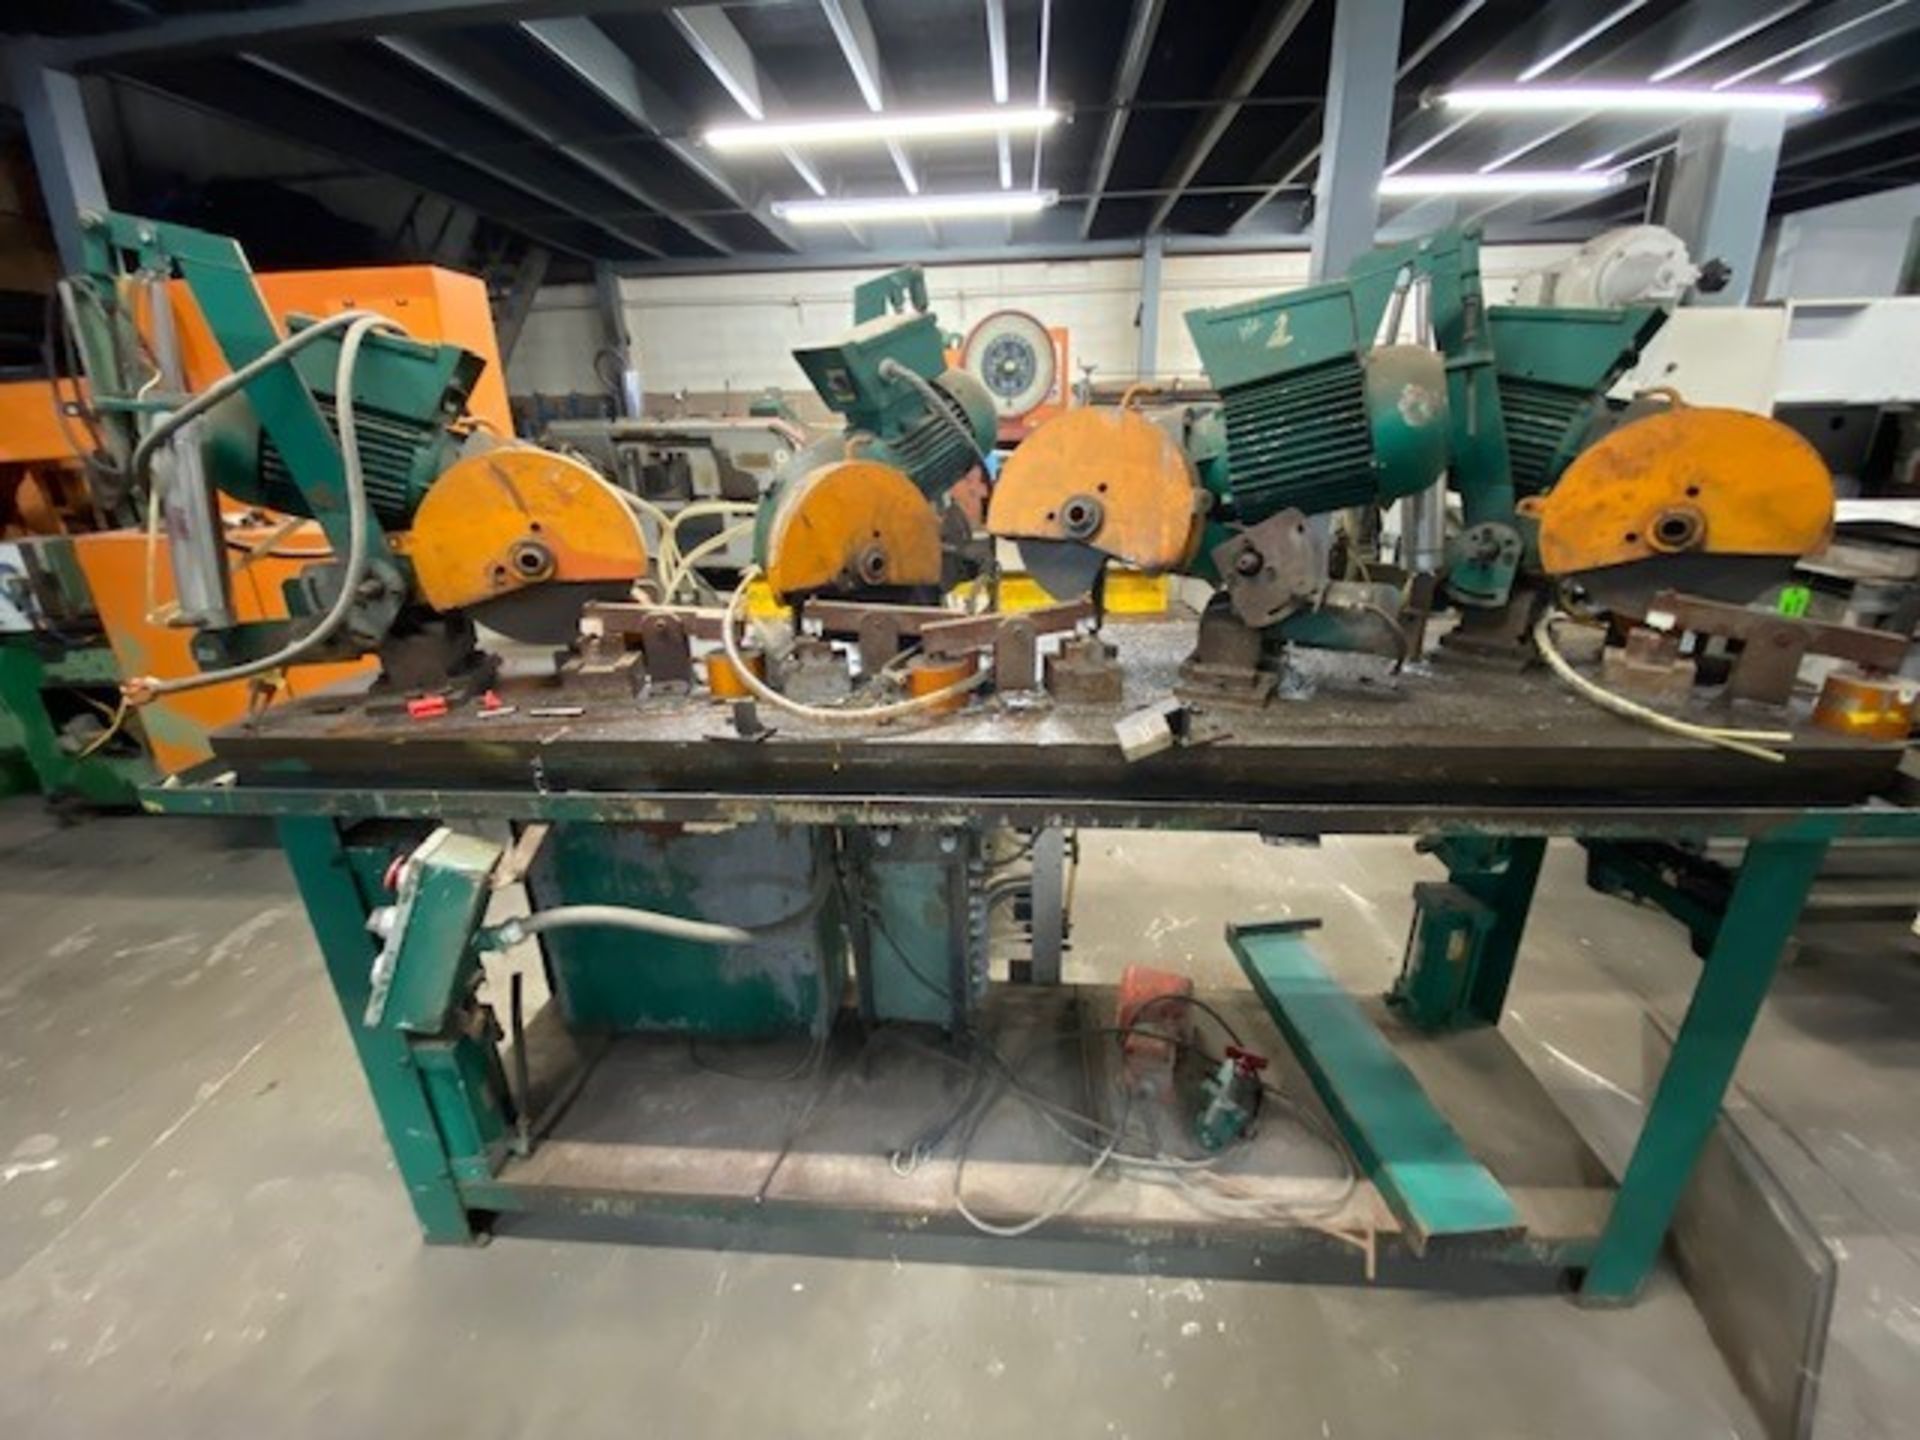 Multi Head Cold Saw, (4) Two Speed Bewo Saw Heads, 10" Maximum Blade Dia., Pneumatic Feed Cylinders